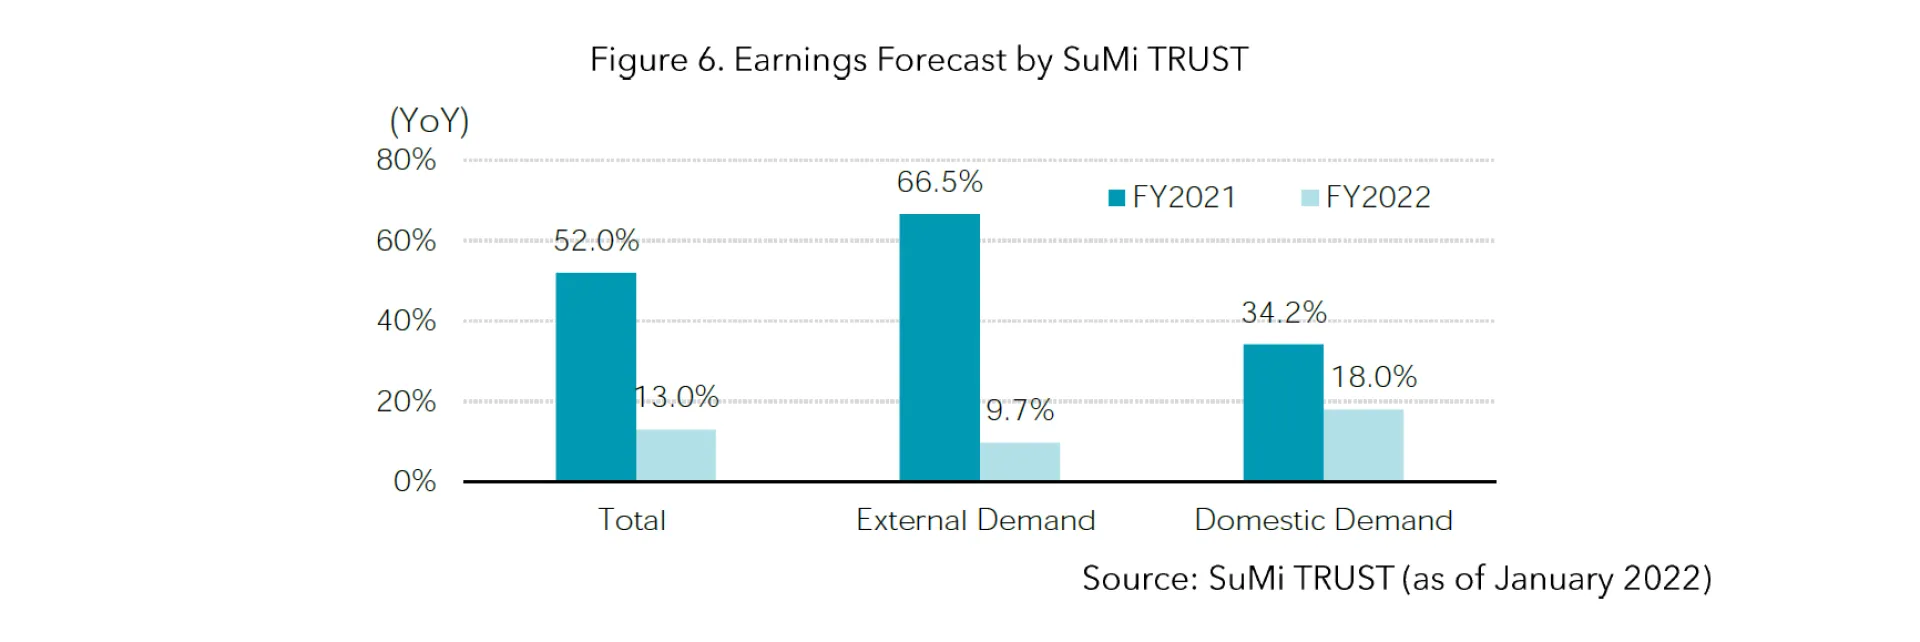 Figure 6 Earnings Forecast by SuMi TRUST